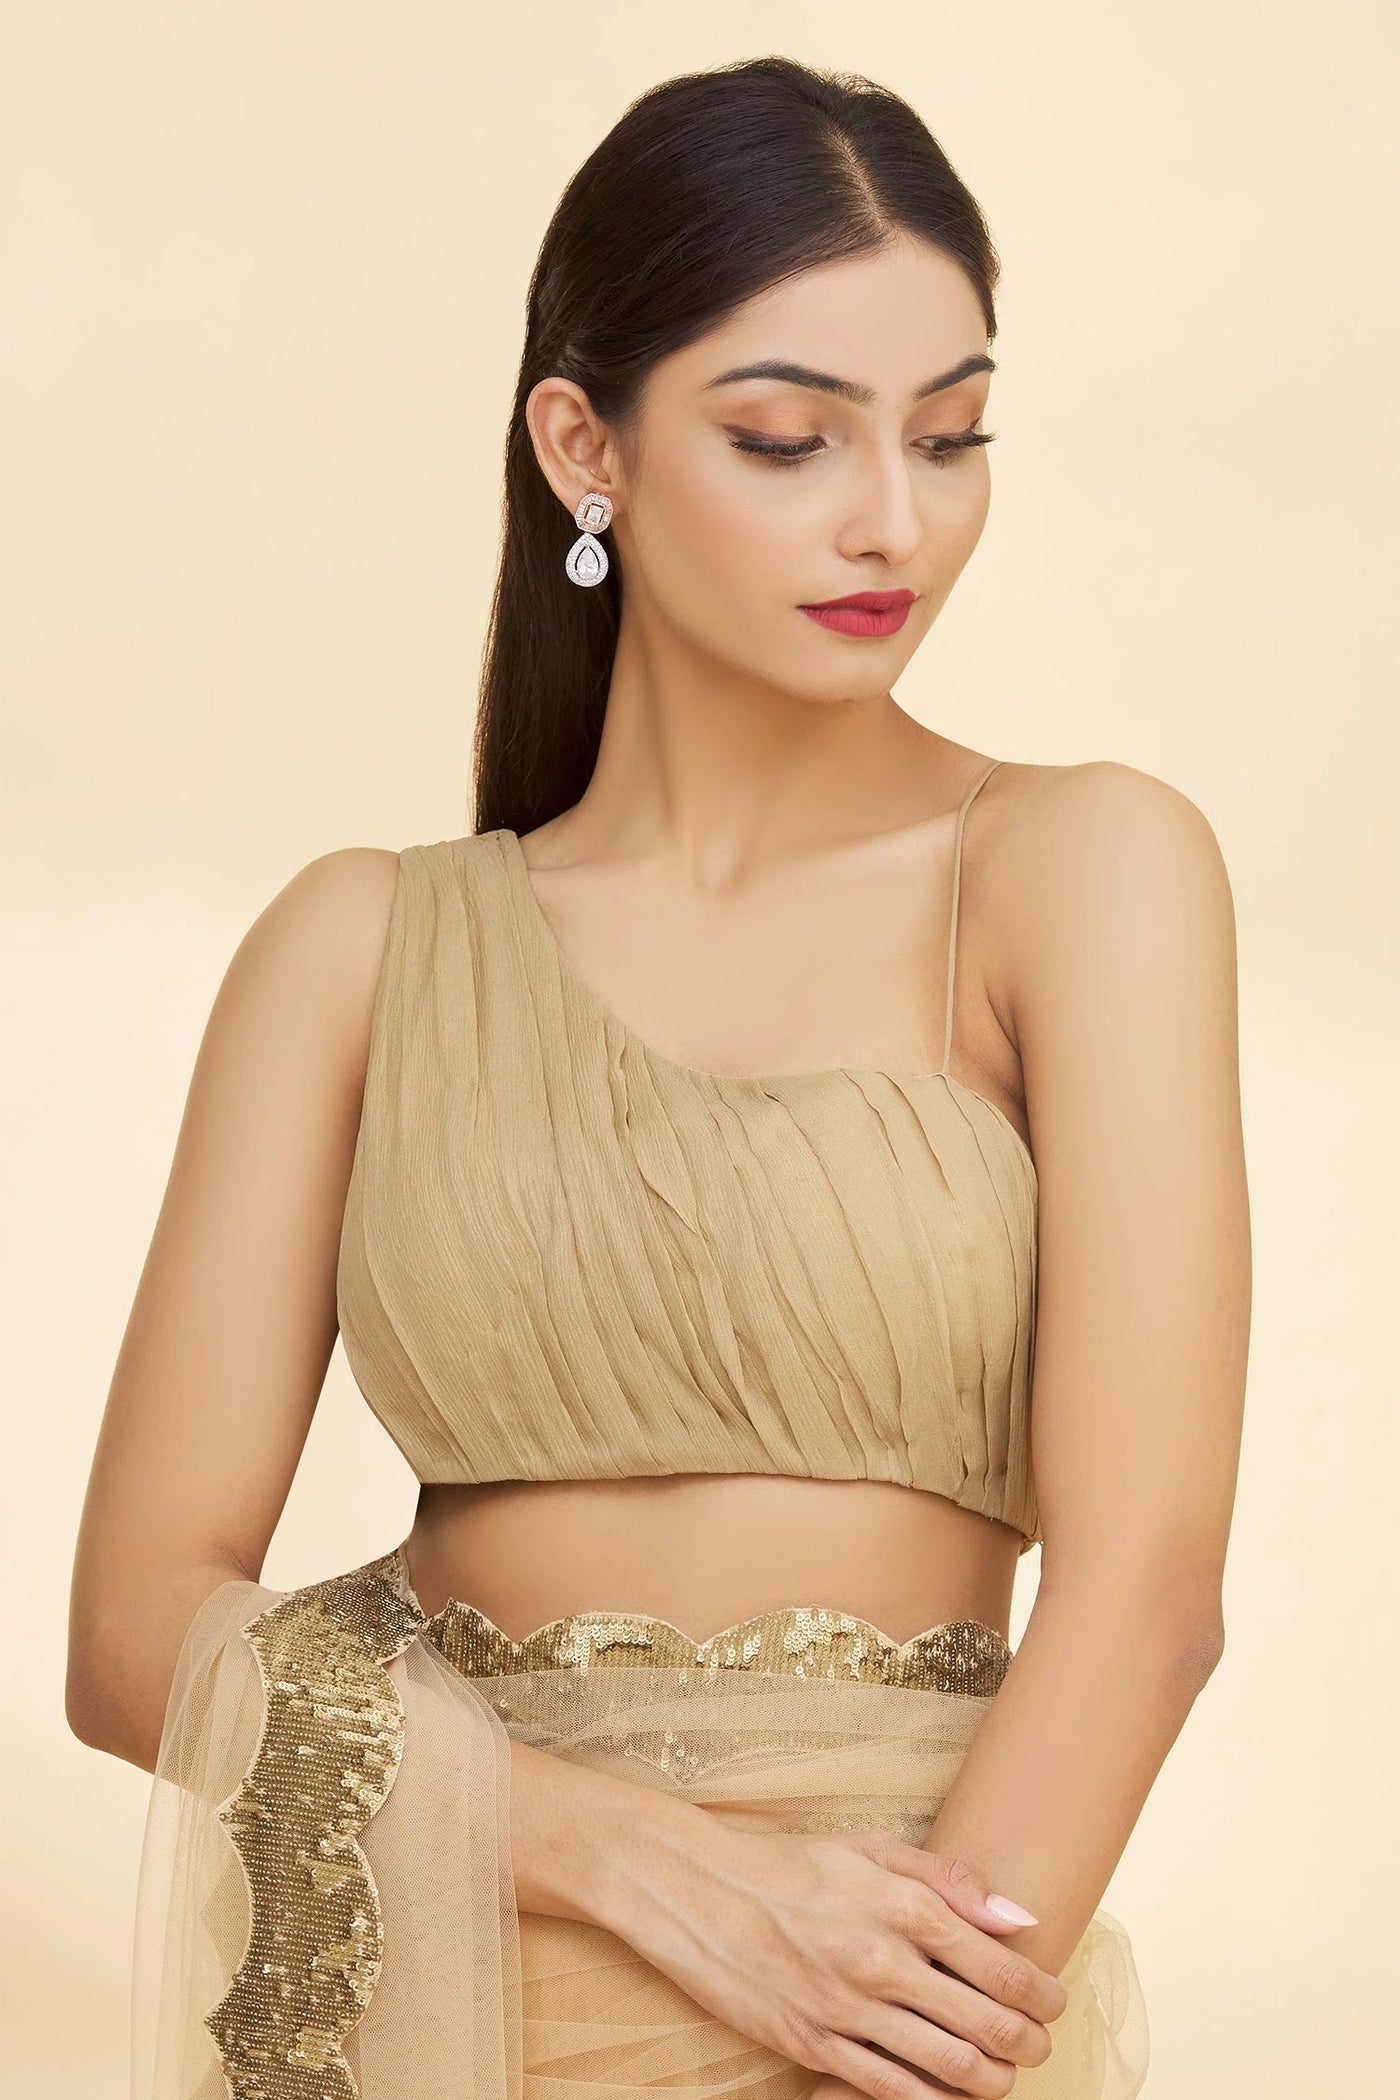 Beige Scalloped Hem Saree - Indian Clothing in Denver, CO, Aurora, CO, Boulder, CO, Fort Collins, CO, Colorado Springs, CO, Parker, CO, Highlands Ranch, CO, Cherry Creek, CO, Centennial, CO, and Longmont, CO. Nationwide shipping USA - India Fashion X